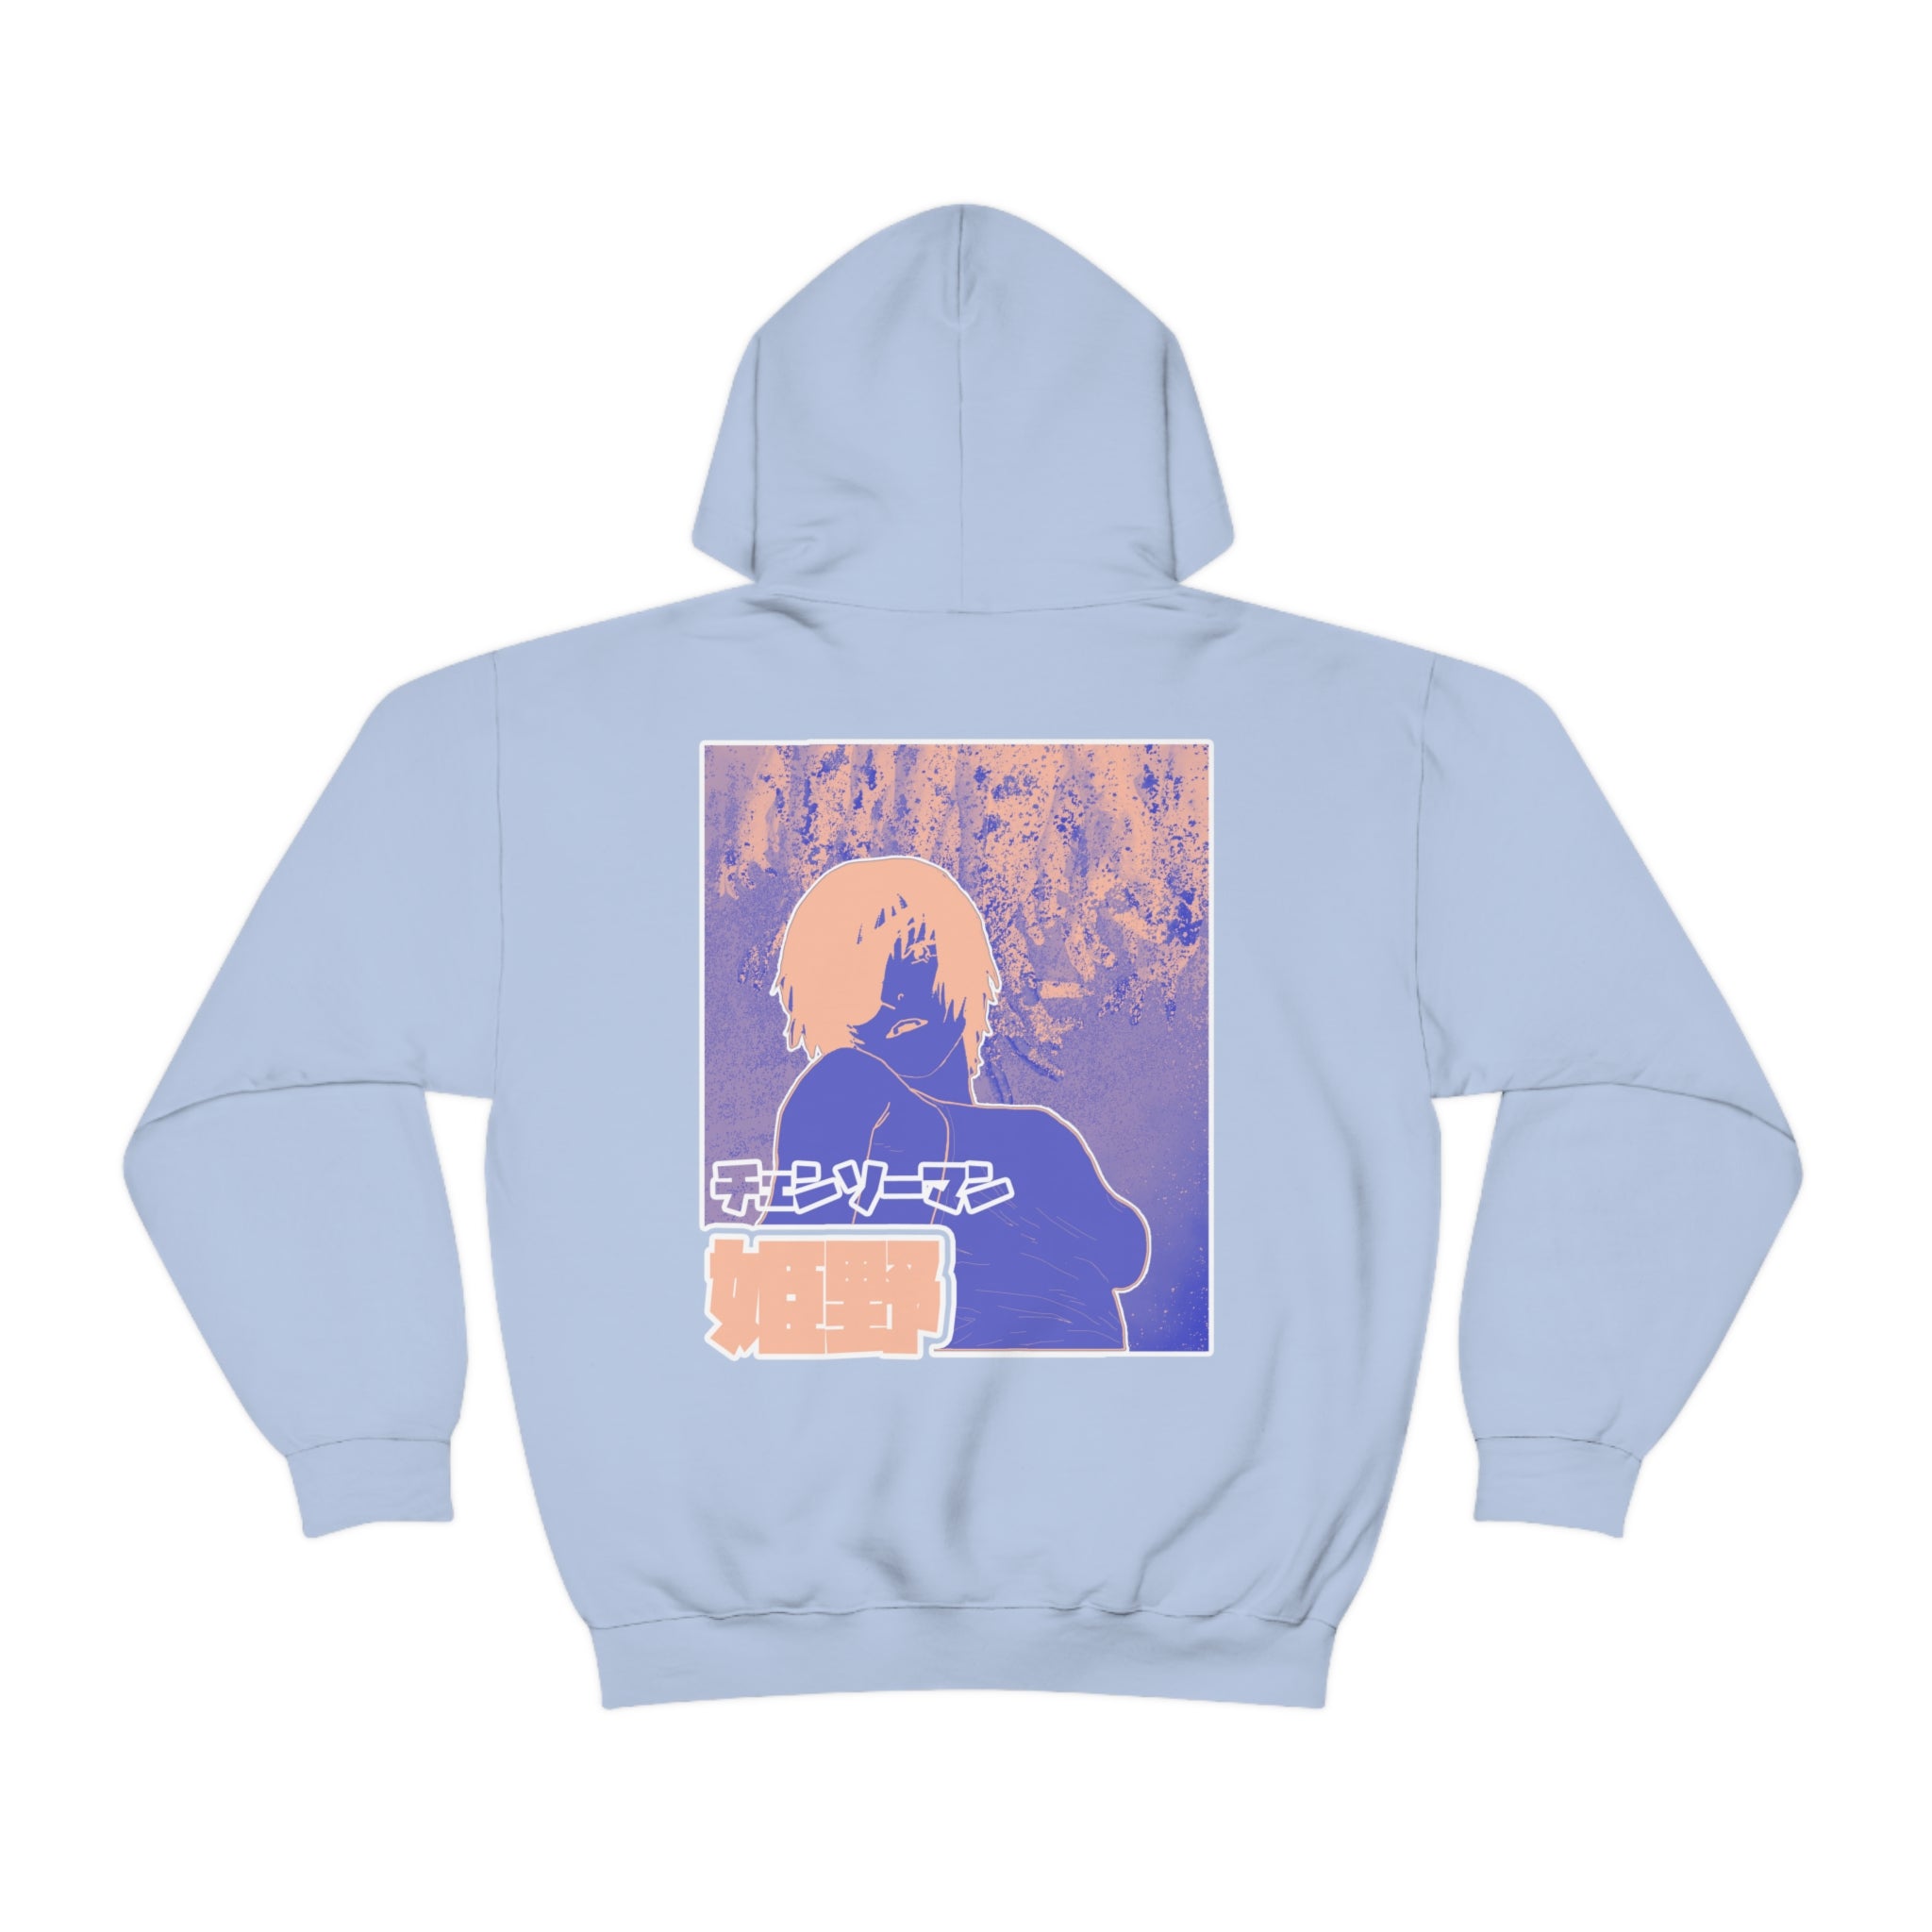 First Time Hoodie